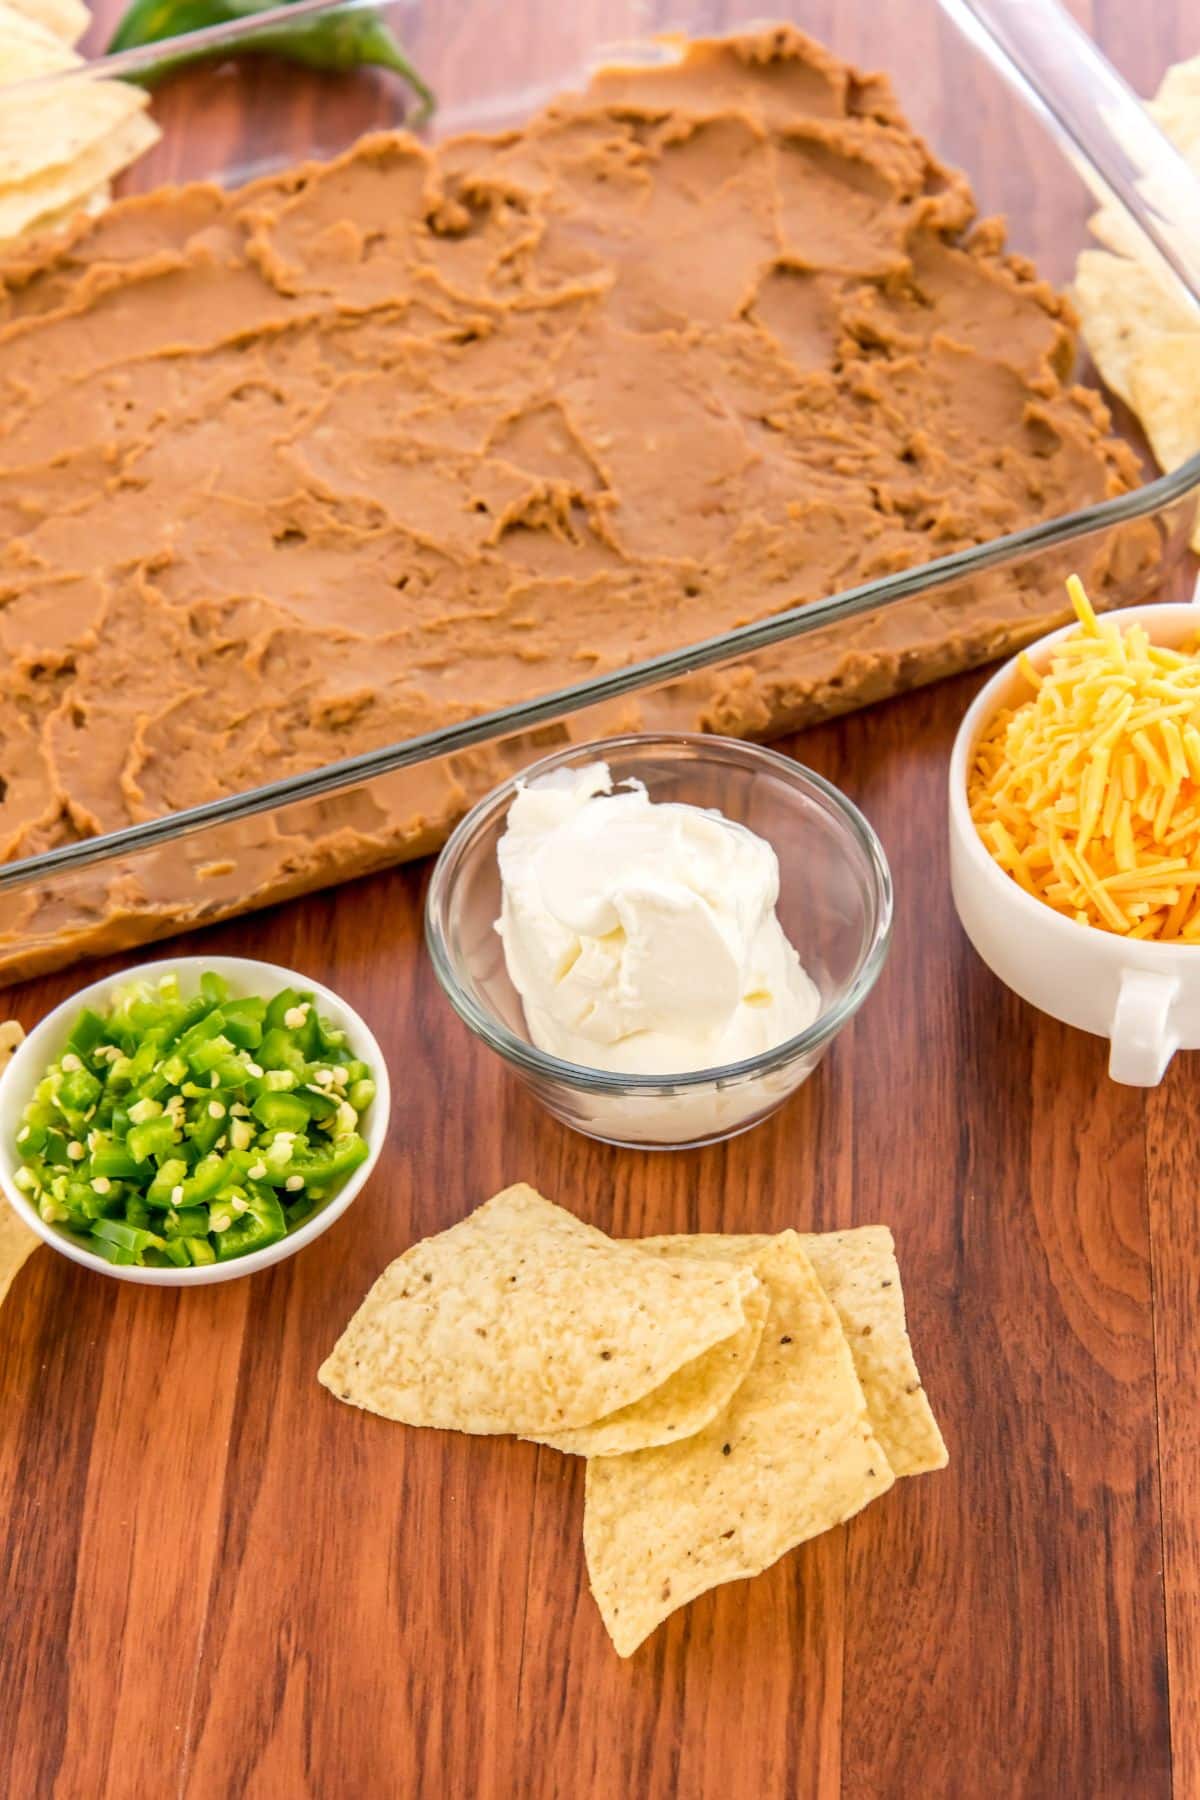 Bean dip in a glass pan next to bowls filled with other ingredients.